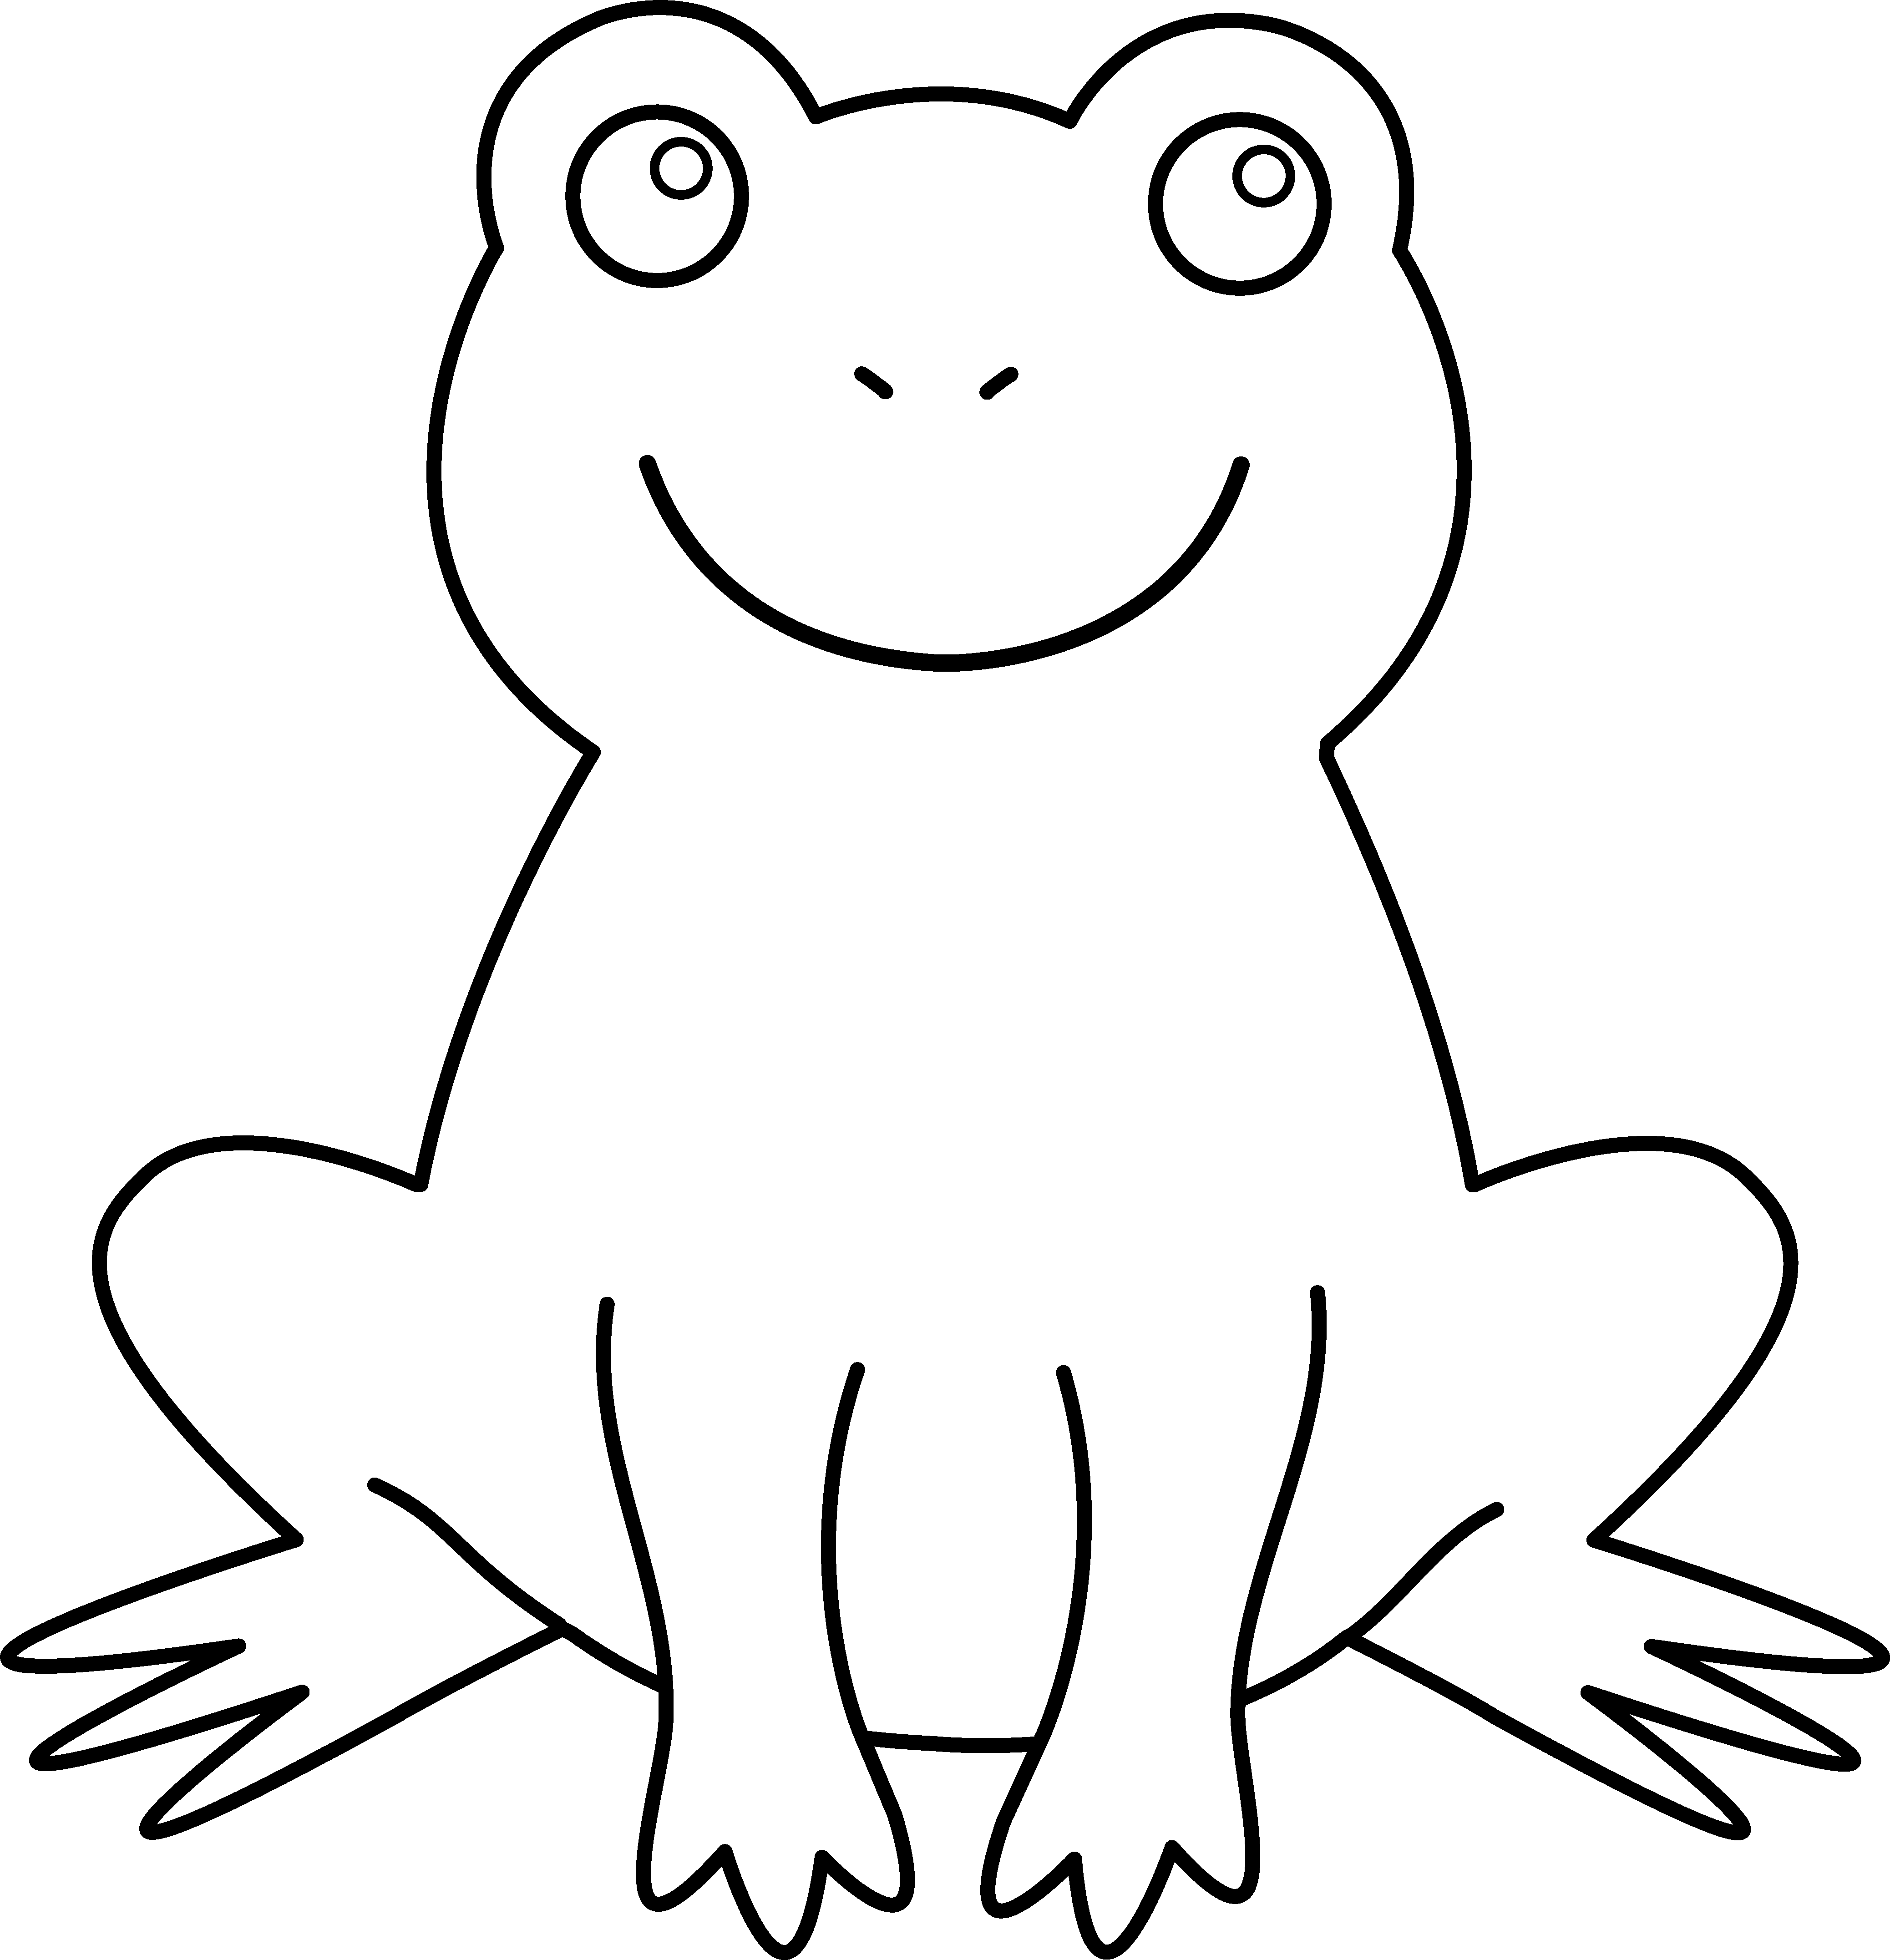 Cute Frog Outline Images  Pictures - Becuo